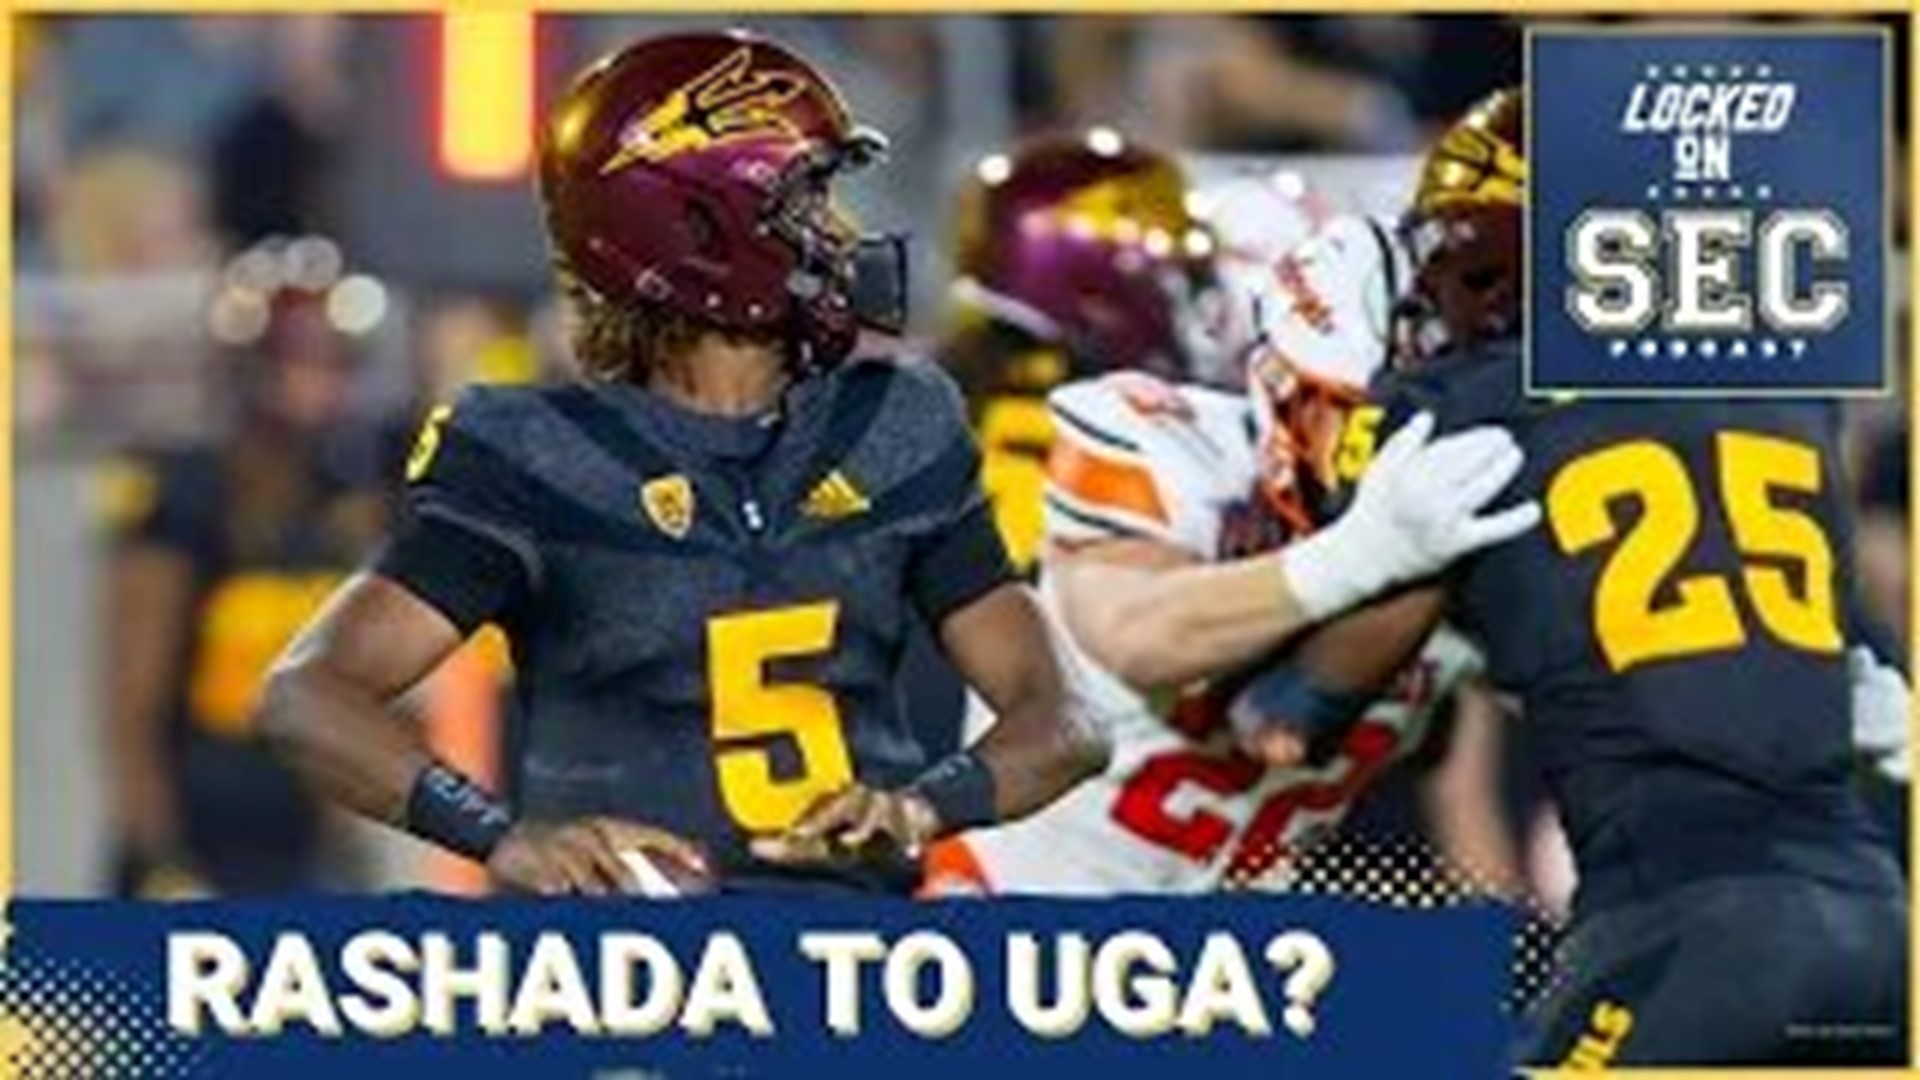 On today's show, we are reacting to the latest college football players to enter the portal including Arizona State QB Jaden Rashada, as he transfers from Arizona St